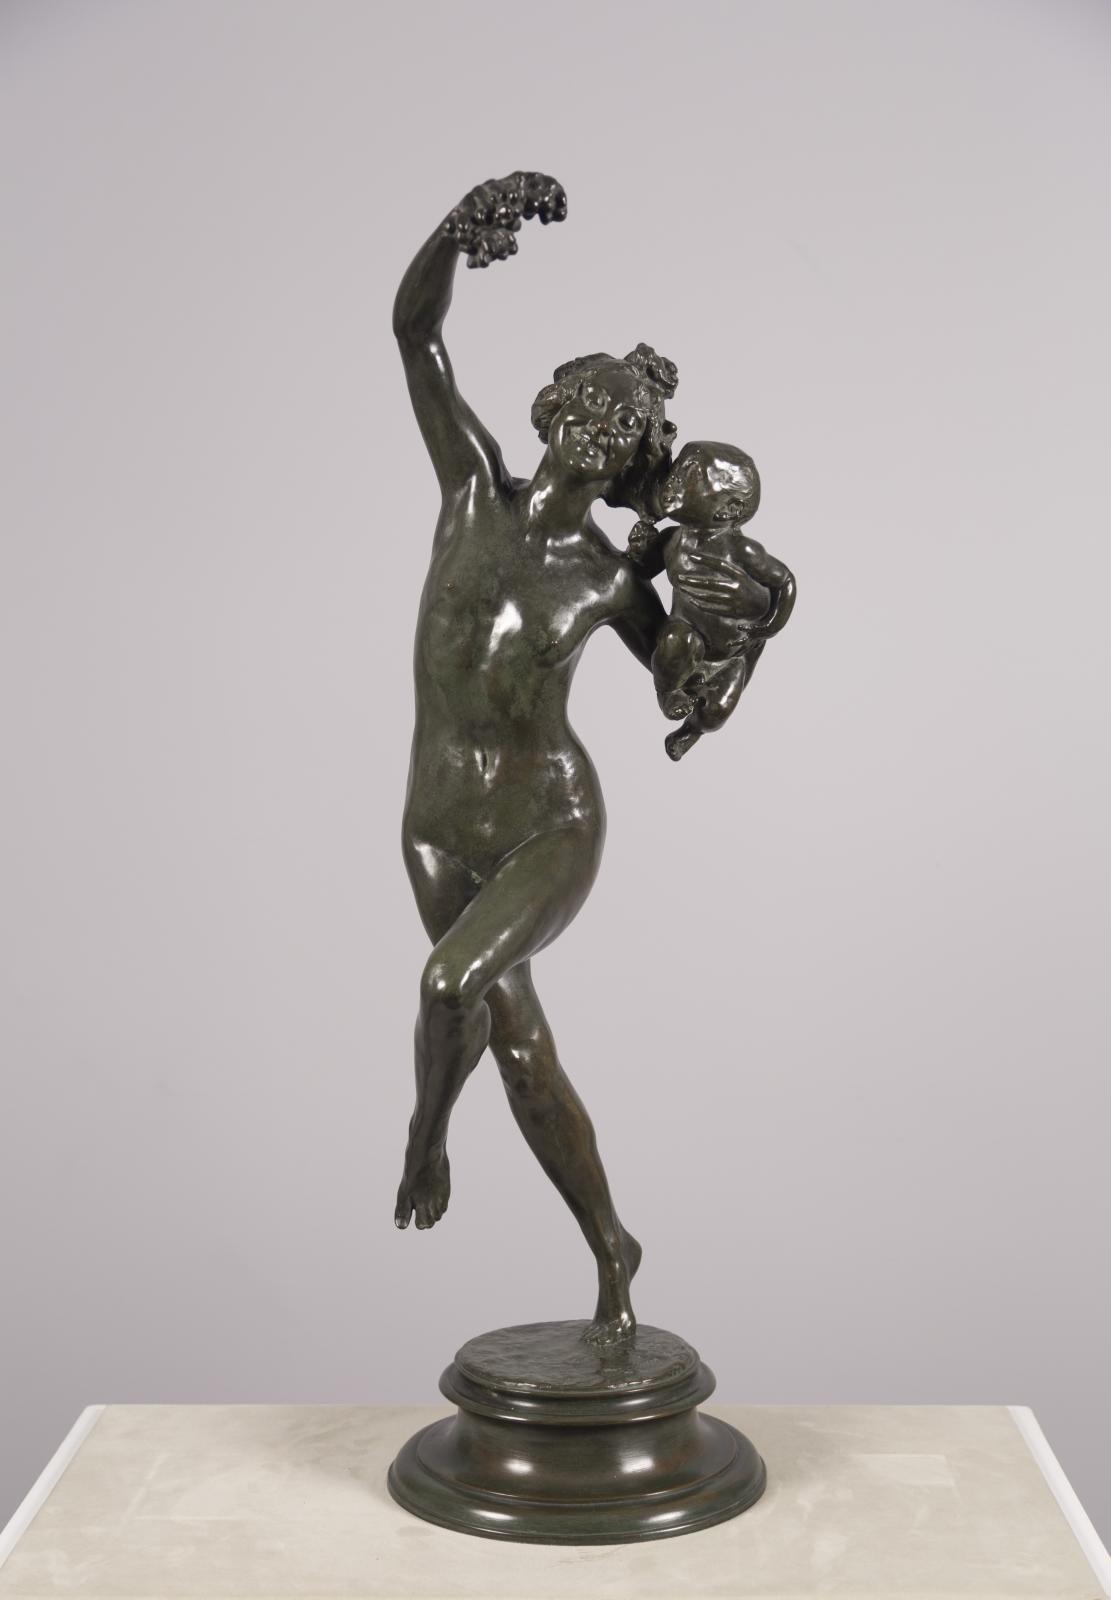 Frederick William MacMonnies, Bacchante with Infant Faun, 1894